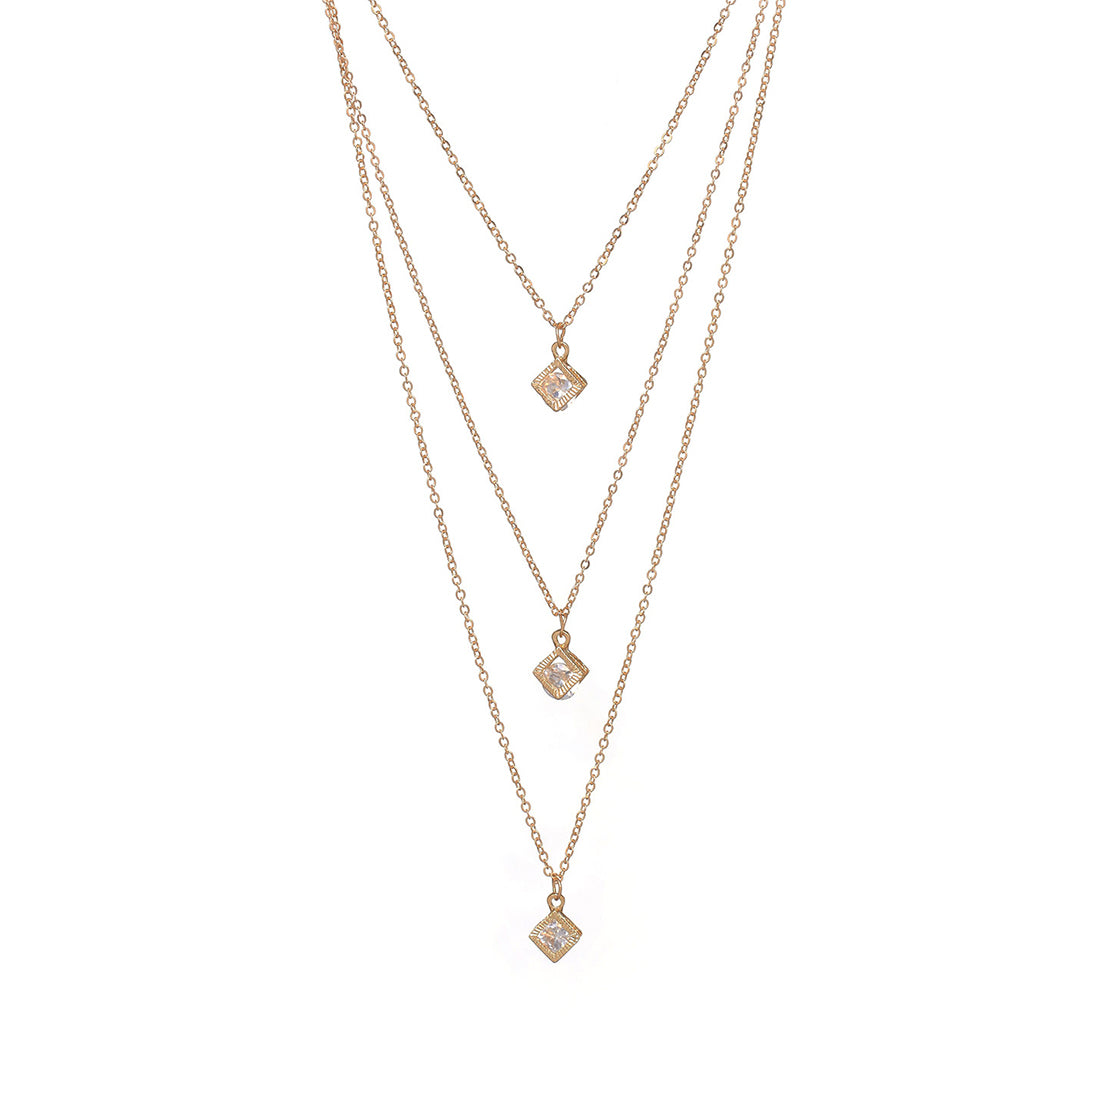 Triple Layer Gold Necklace - 3D Cube with Diamante